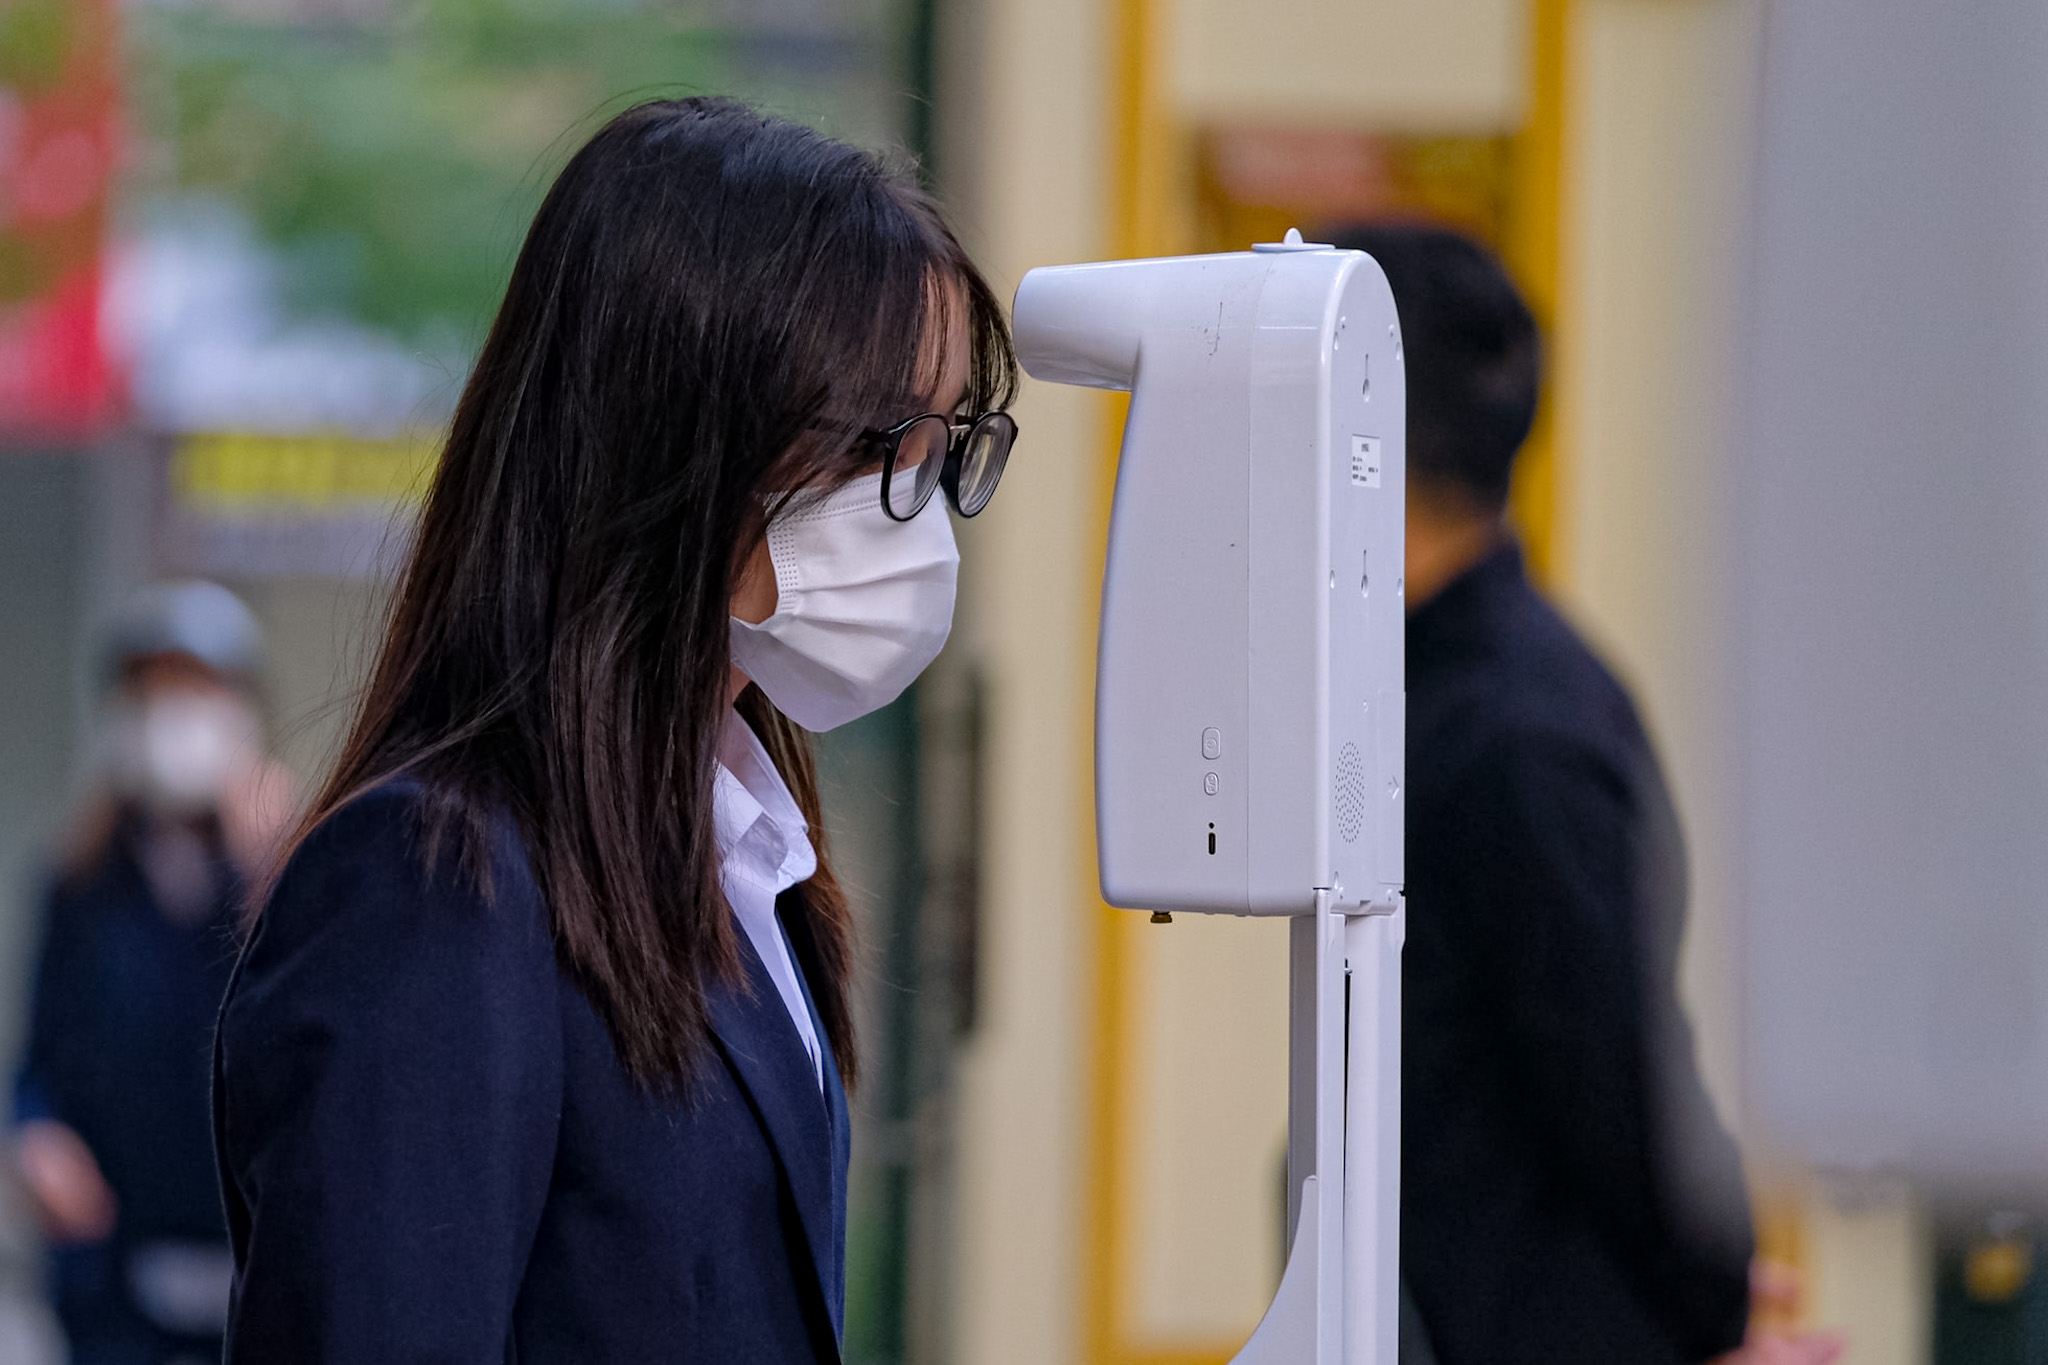 Viet Duc High School arranges automatic temperature screening and disinfection machines for students at the front gate in Hoan Kiem District, Hanoi, December 6, 2021. Photo: Tuoi Tre